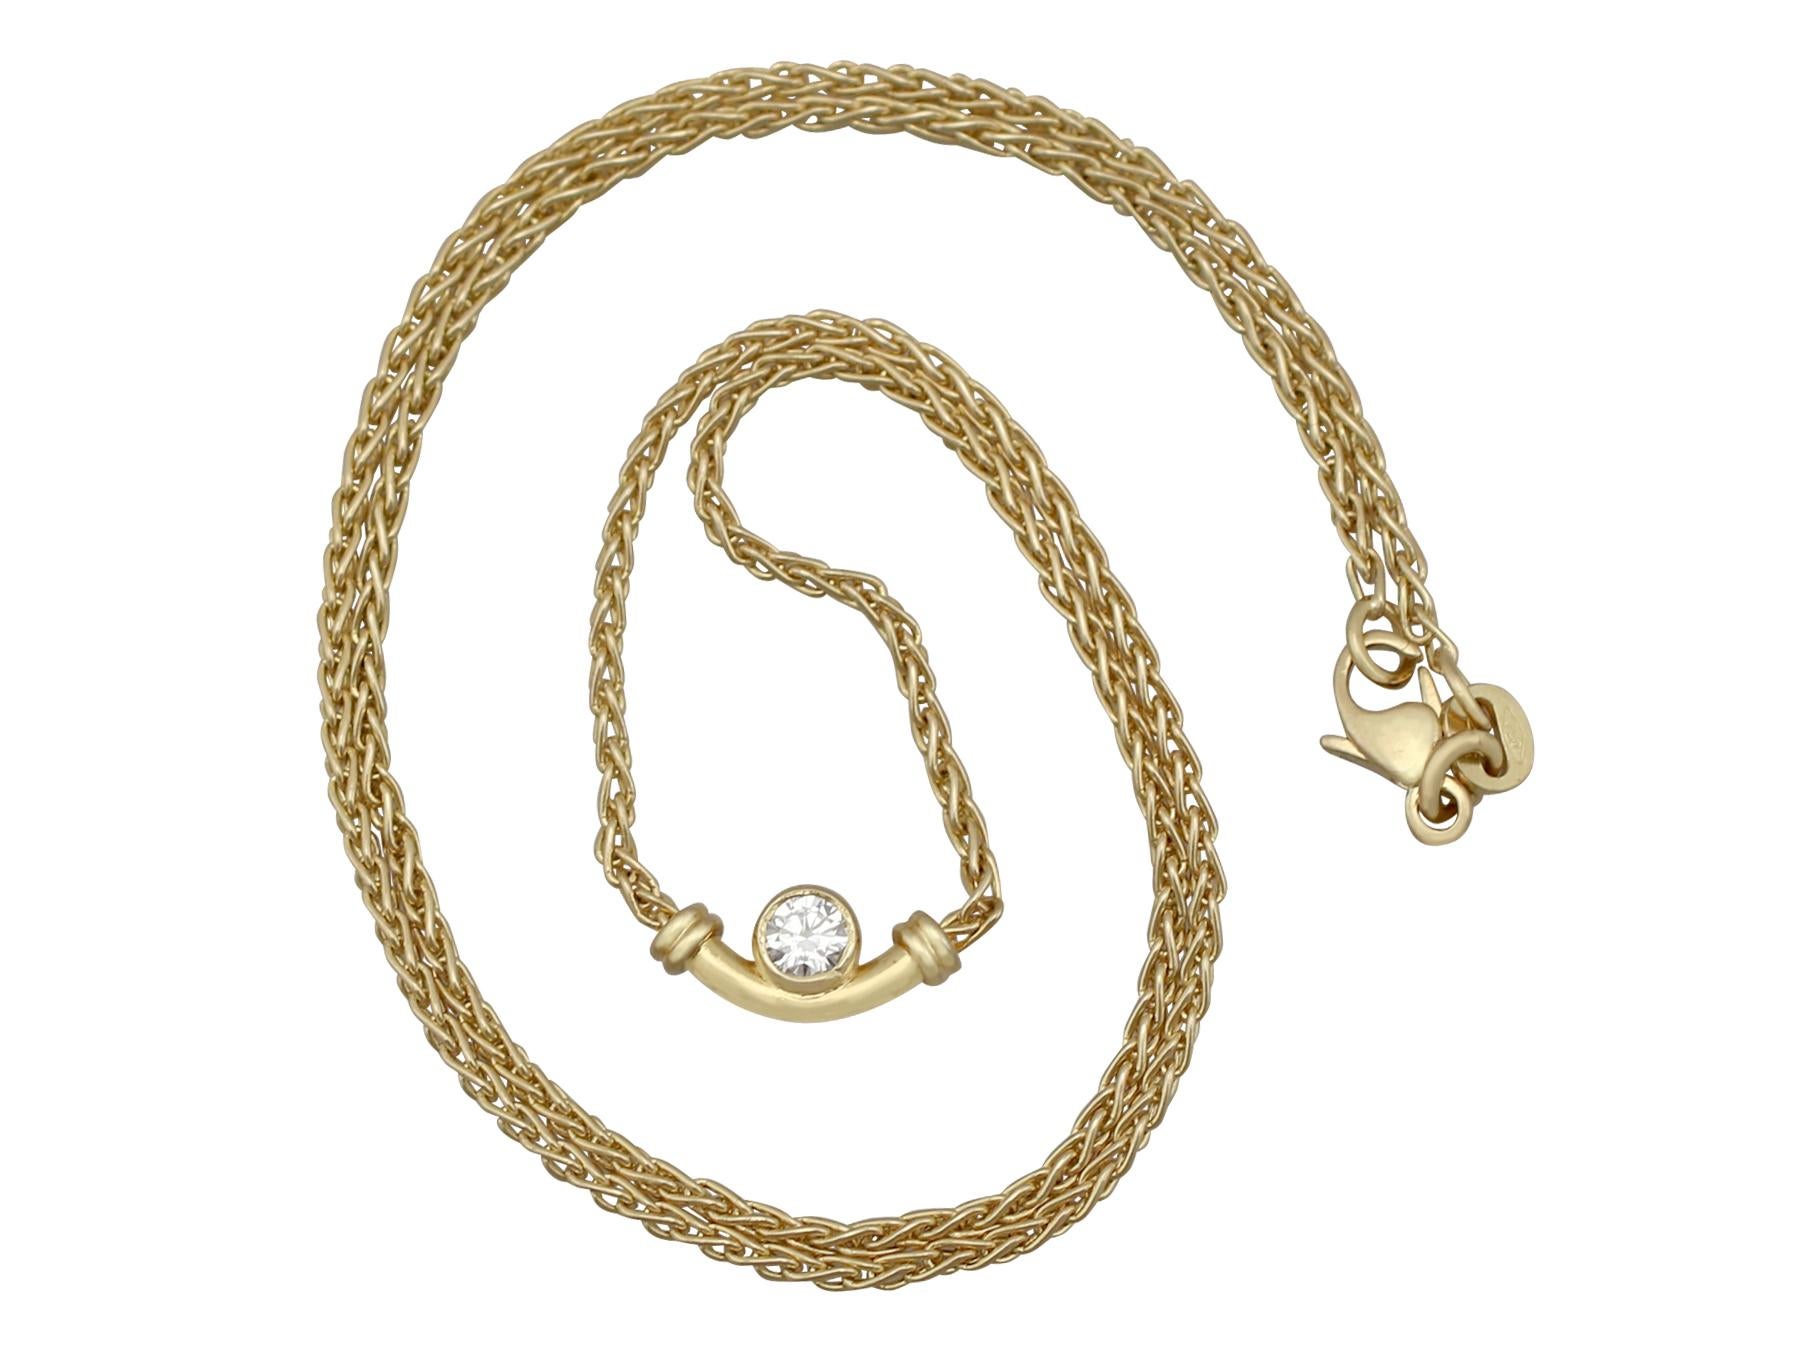 An impressive vintage 0.17 carat diamond and 18 karat yellow gold necklace; part of our diverse diamond jewelry and estate jewelry collections.

This fine and impressive diamond pendant has been crafted in 18k yellow gold.

The curbed tubular